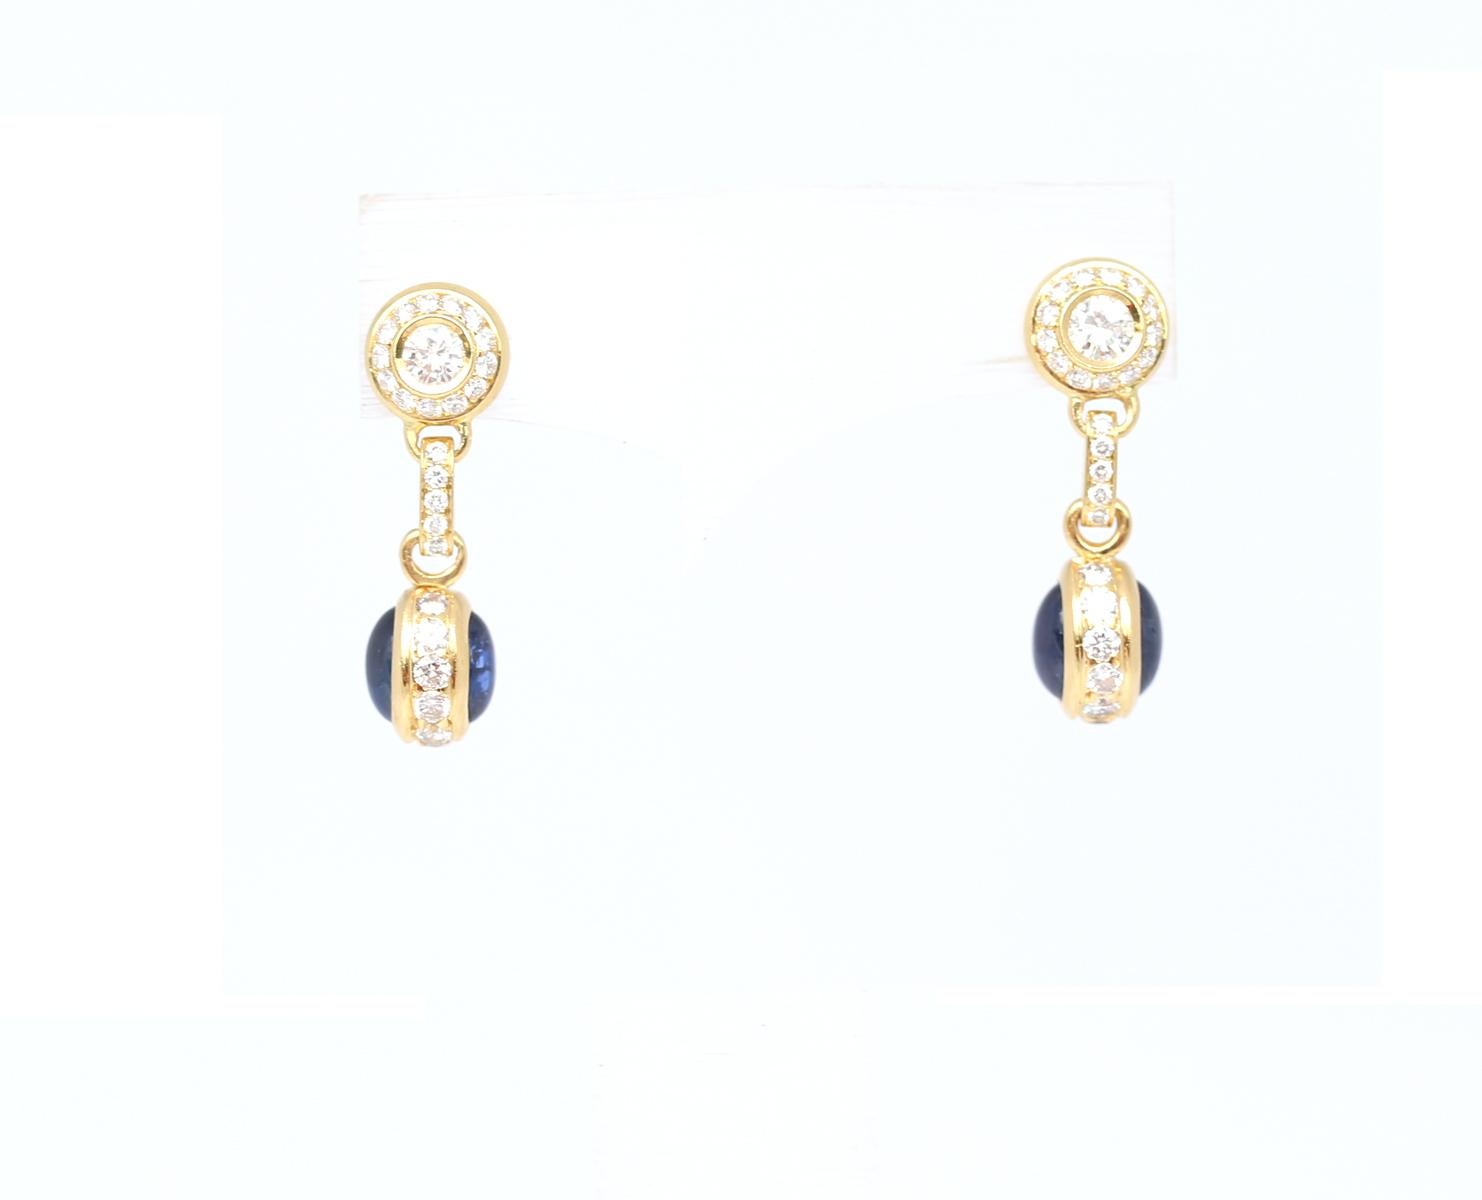 Sapphire Cabochon Diamond Earrings 18K Yellow Gold by Mecan Elde, France. Really fine and delicate earrings by a modern French Jewelry house of Mecan. Fine clear Diamonds. Each part of the earrings is moving freely to capture the motion of the head.